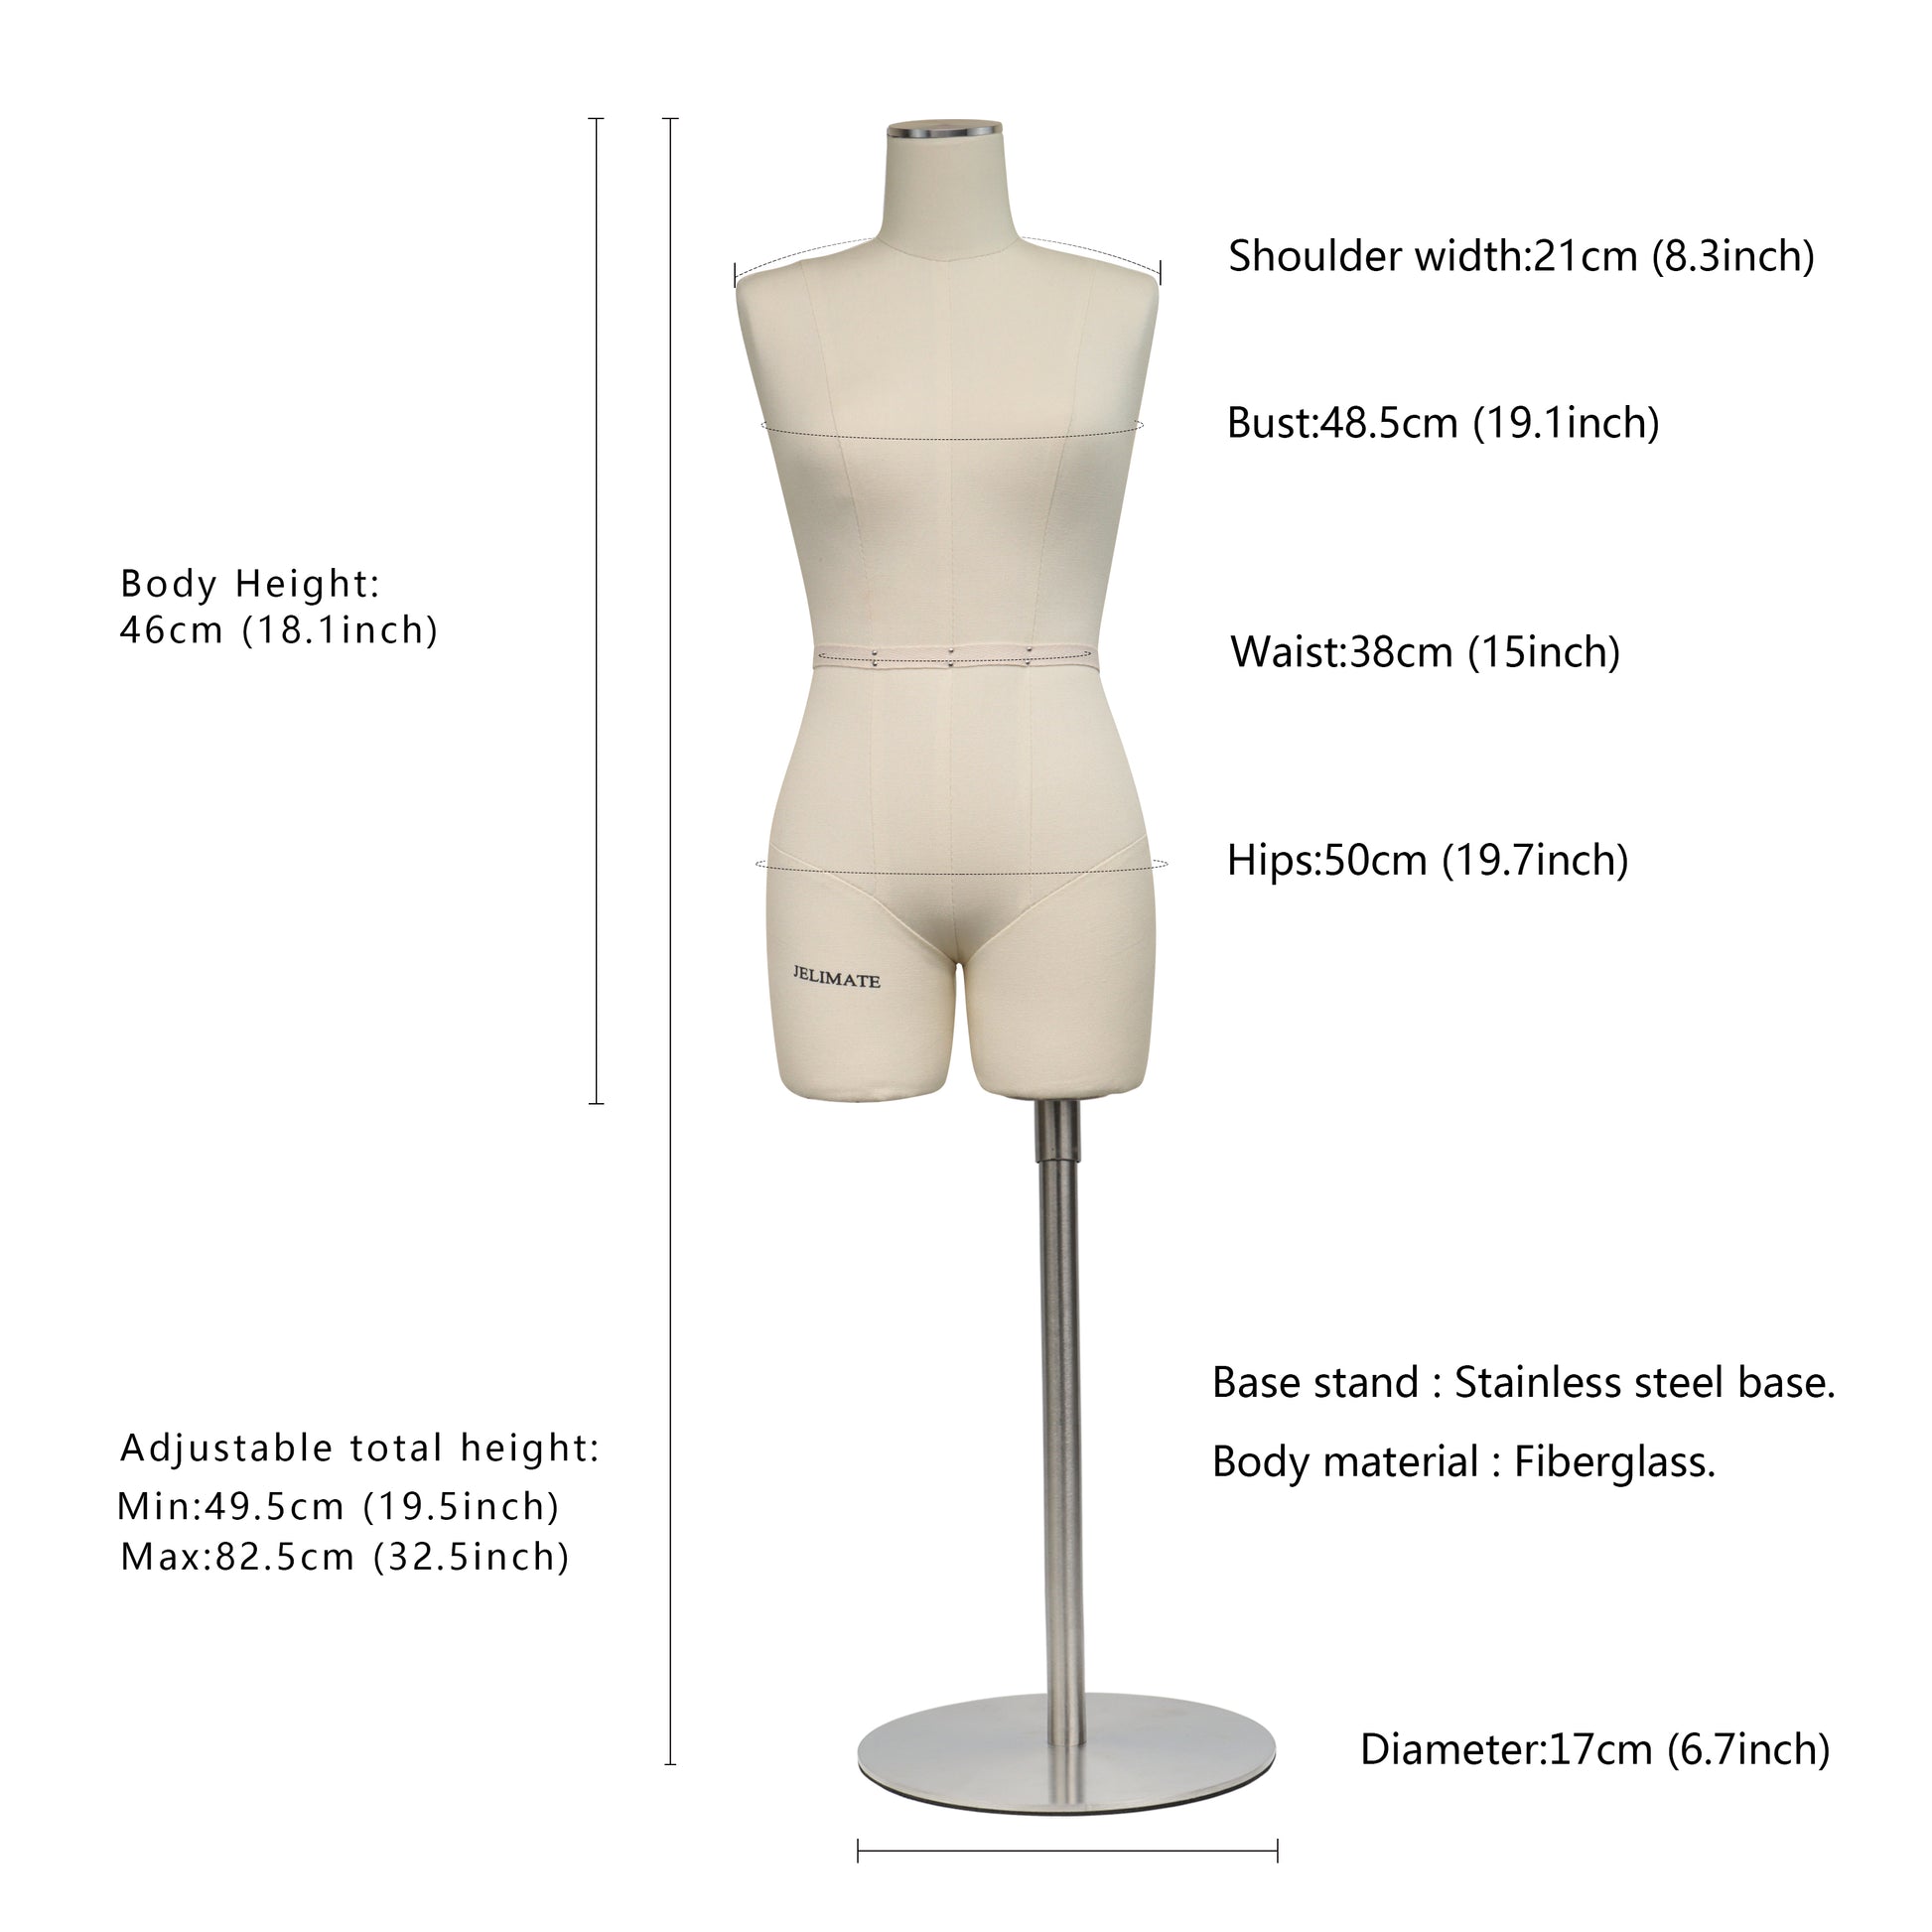 Sewing Female Tailor Model Mannequin Body For Clothes Design, Bust